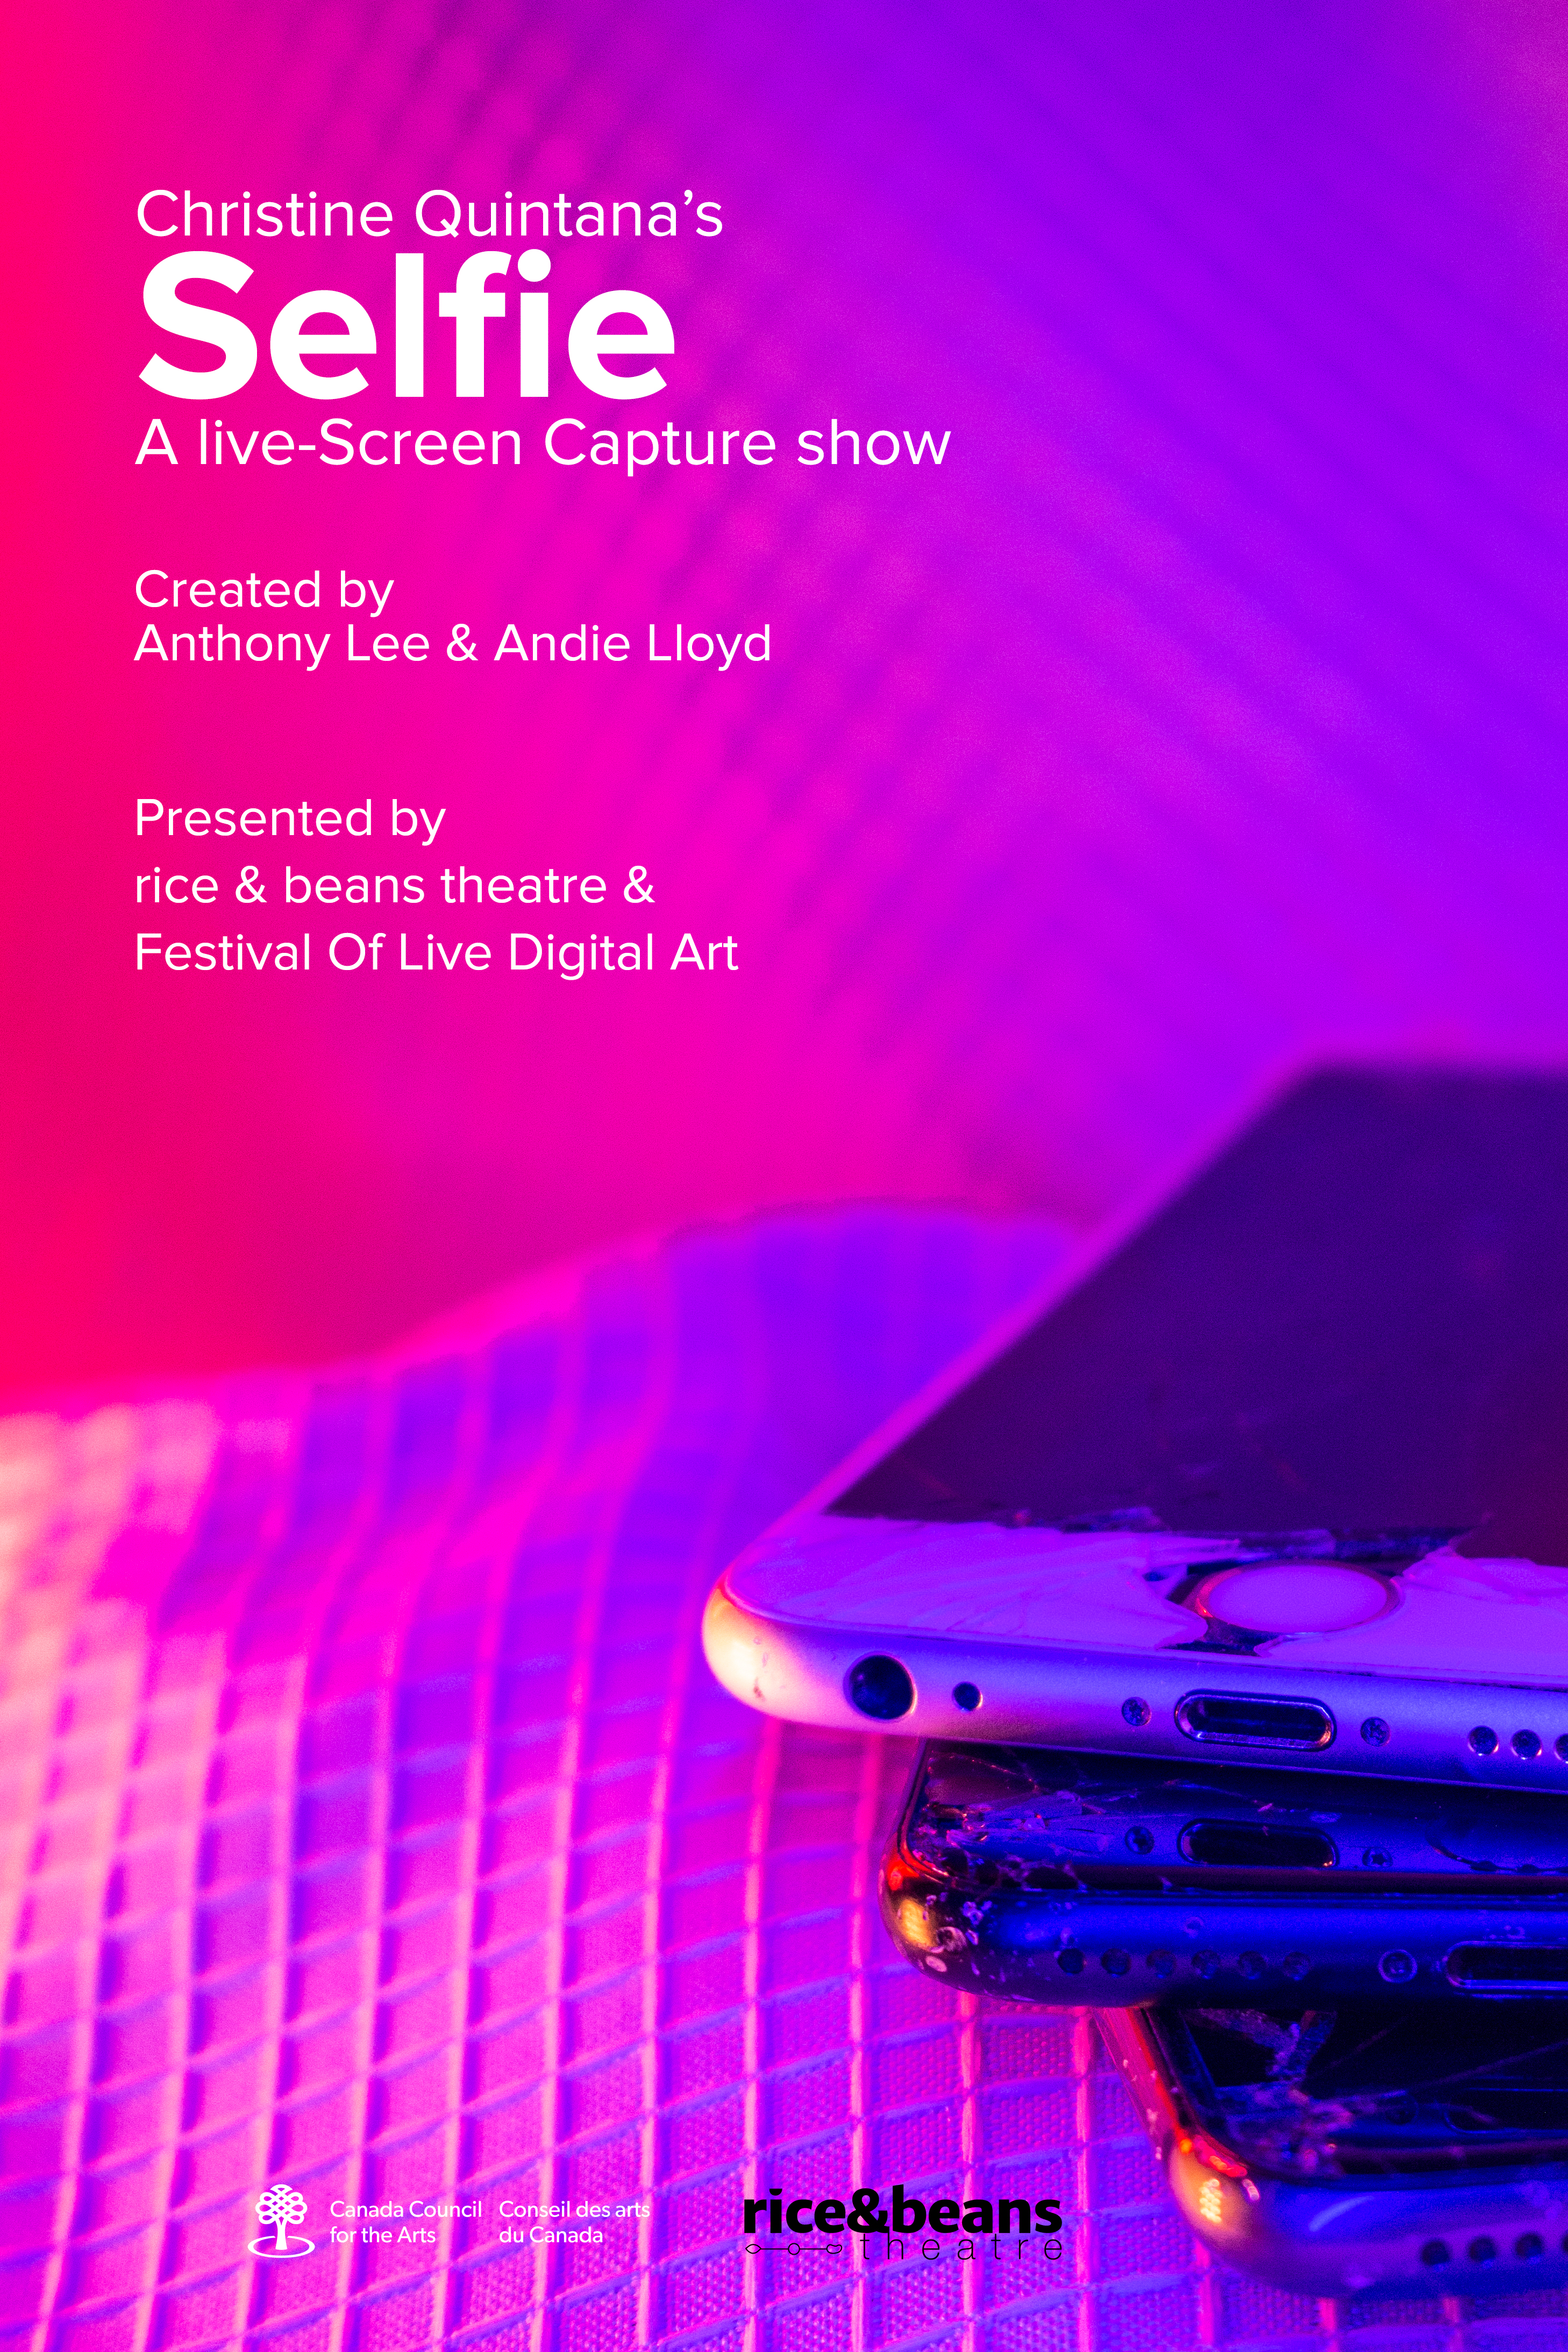 poster for Christine Quintana's Selfie over a neon pink and purple bisexual lighting (yes this is the proper term for it) with 3 broken iphones on the bottom